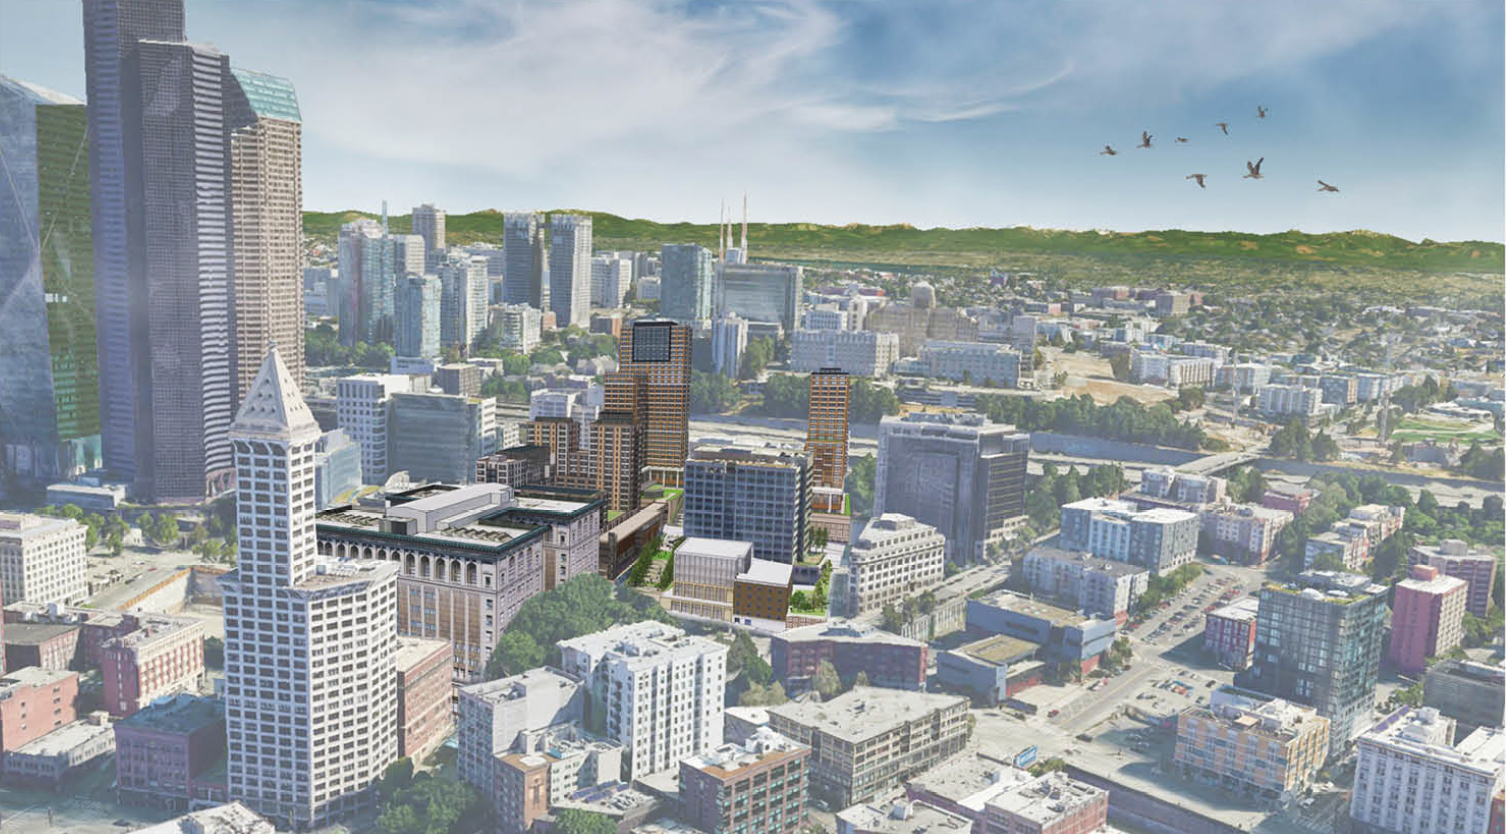 Rendering of a city with skyscrapers and other smaller buildings